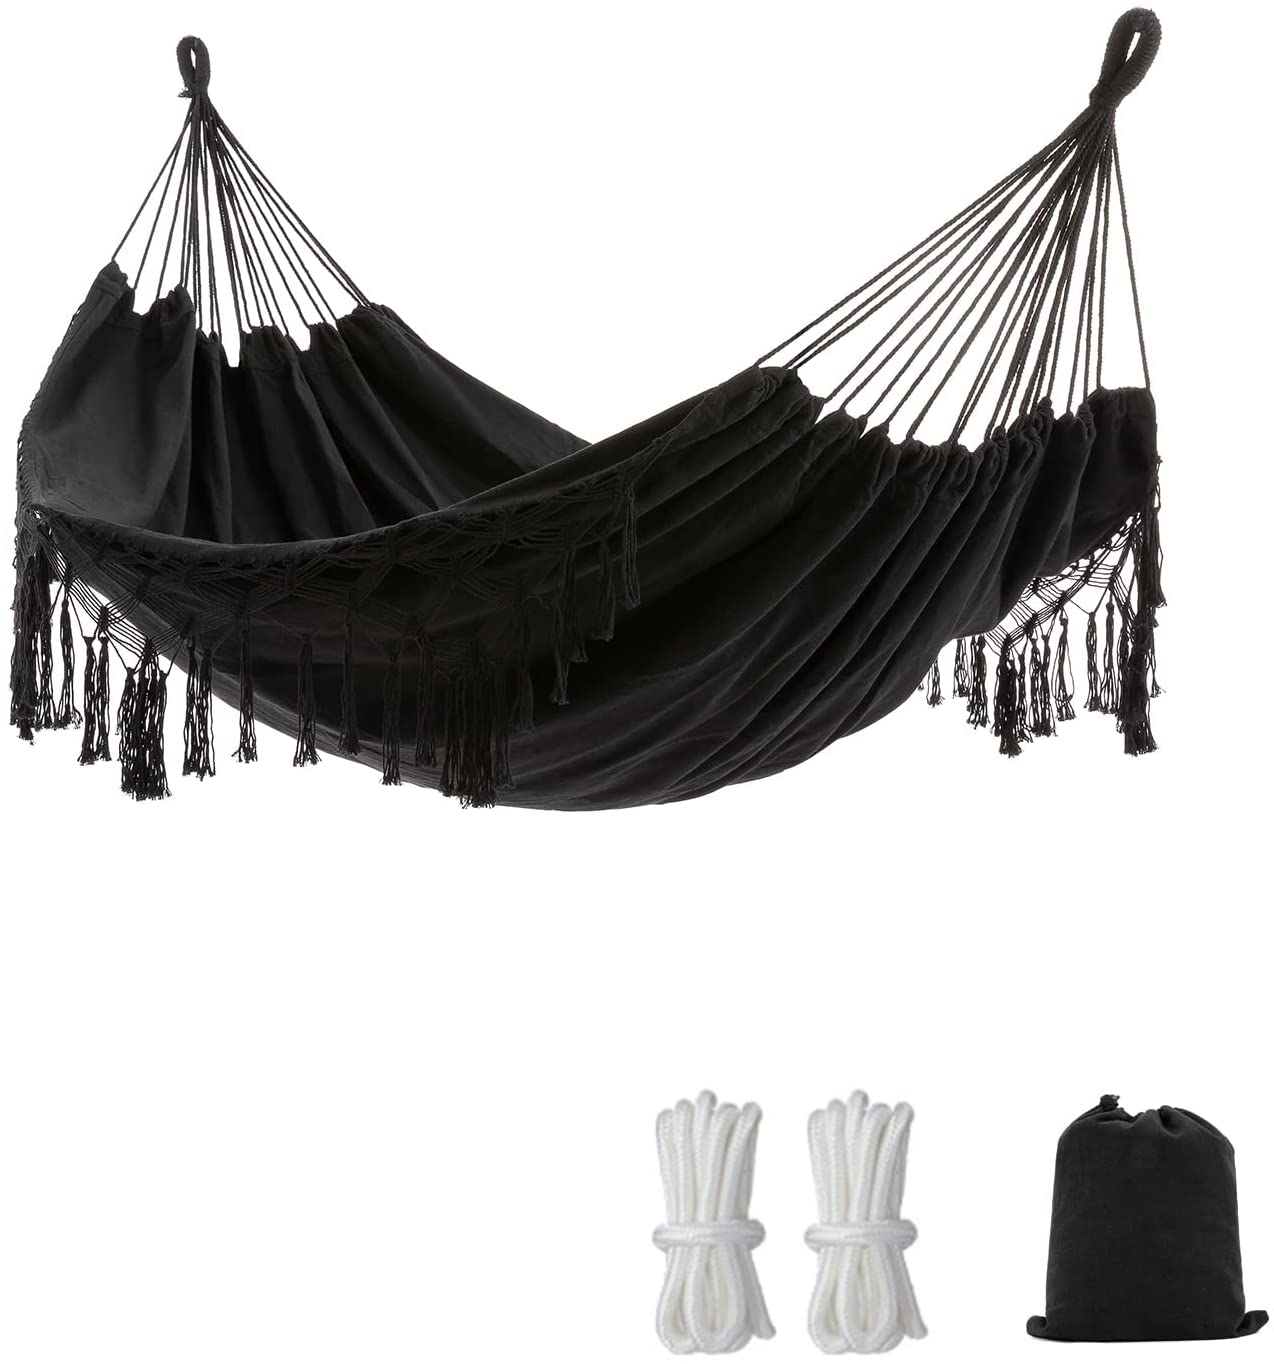 Black Boho Macrame Hammock with Elegant Tassels 450lbs Include Tie Ropes and Drawstring Bag - Home Decor Gifts and More